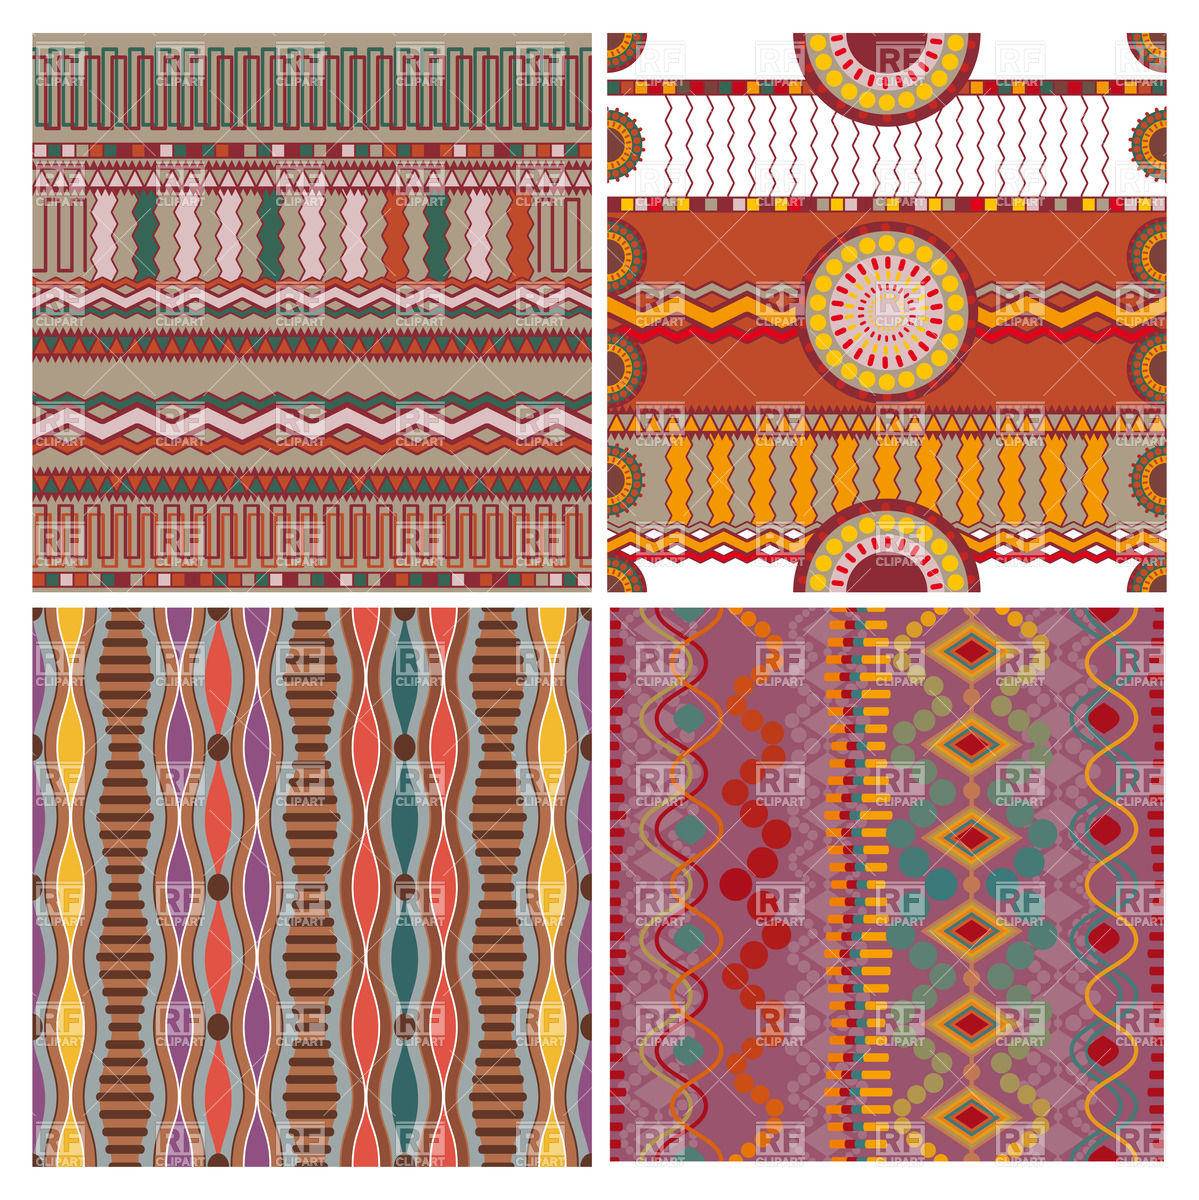 Ethnic Embroidery Patterns Seamless Ethnic Embroidery Patterns Stock Vector Image